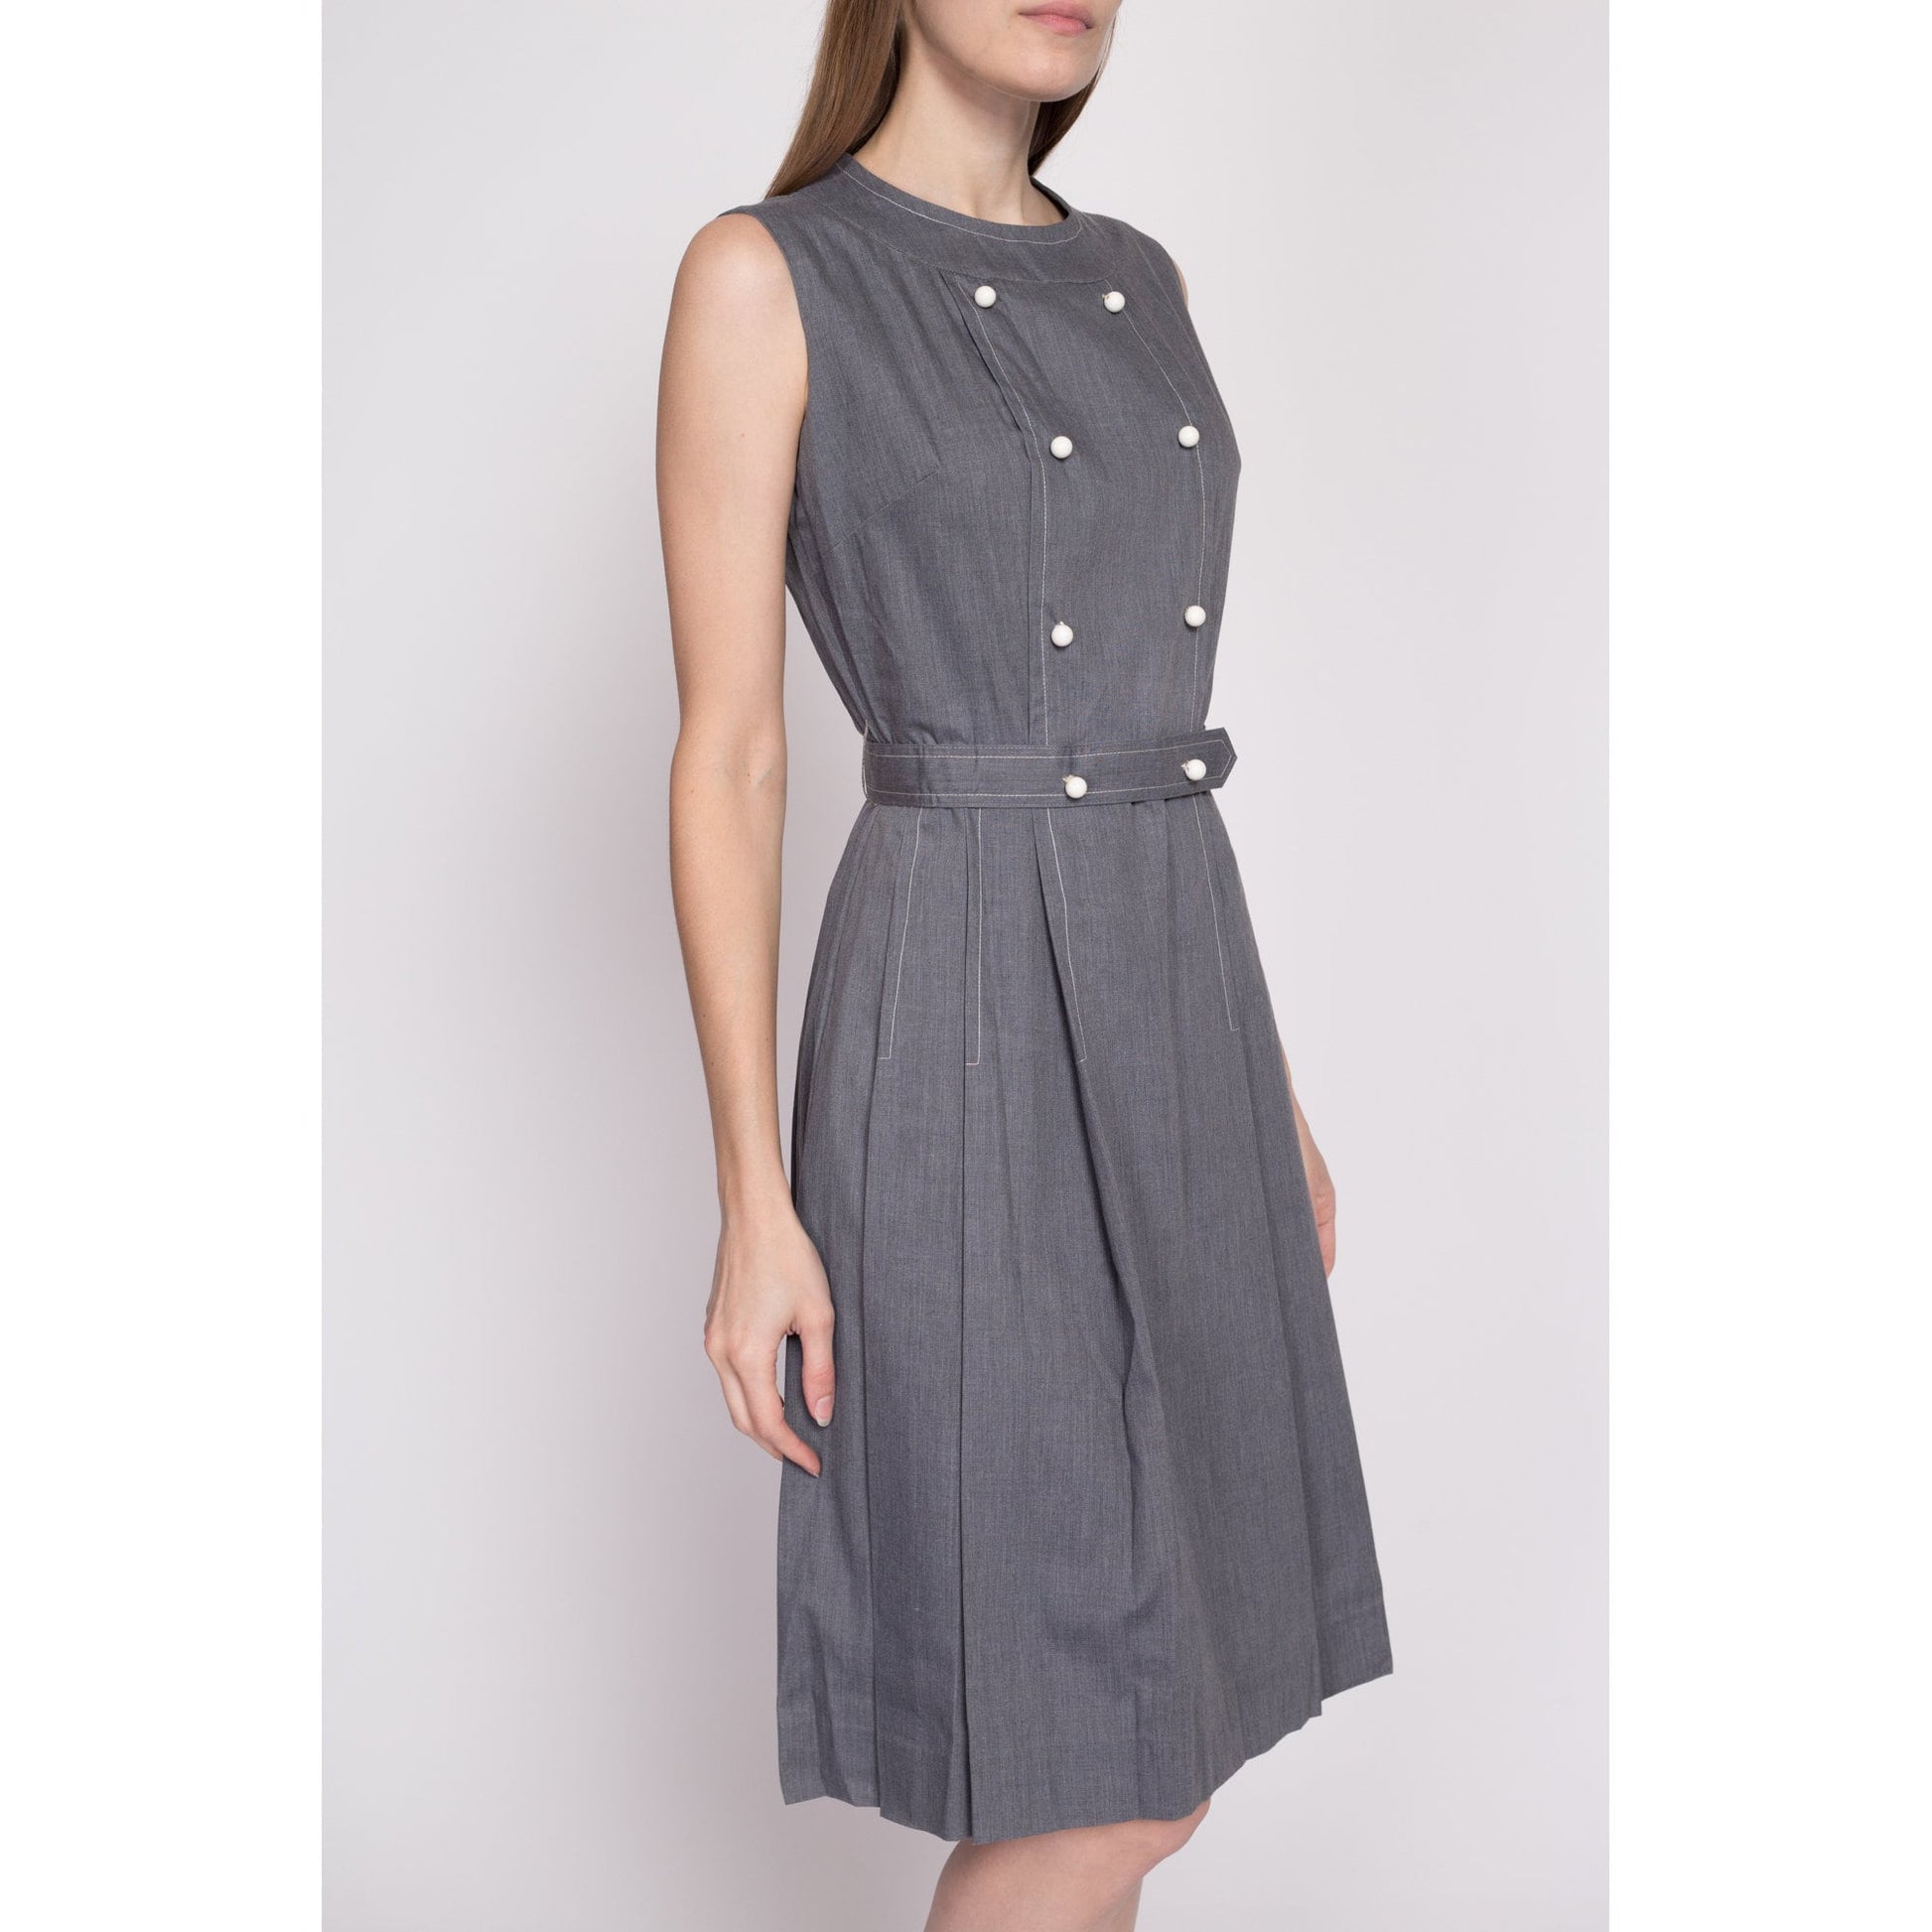 60s Grey Double Breasted Fit & Flare Dress - Small | Vintage Belted Mod Sleeveless Midi Dress